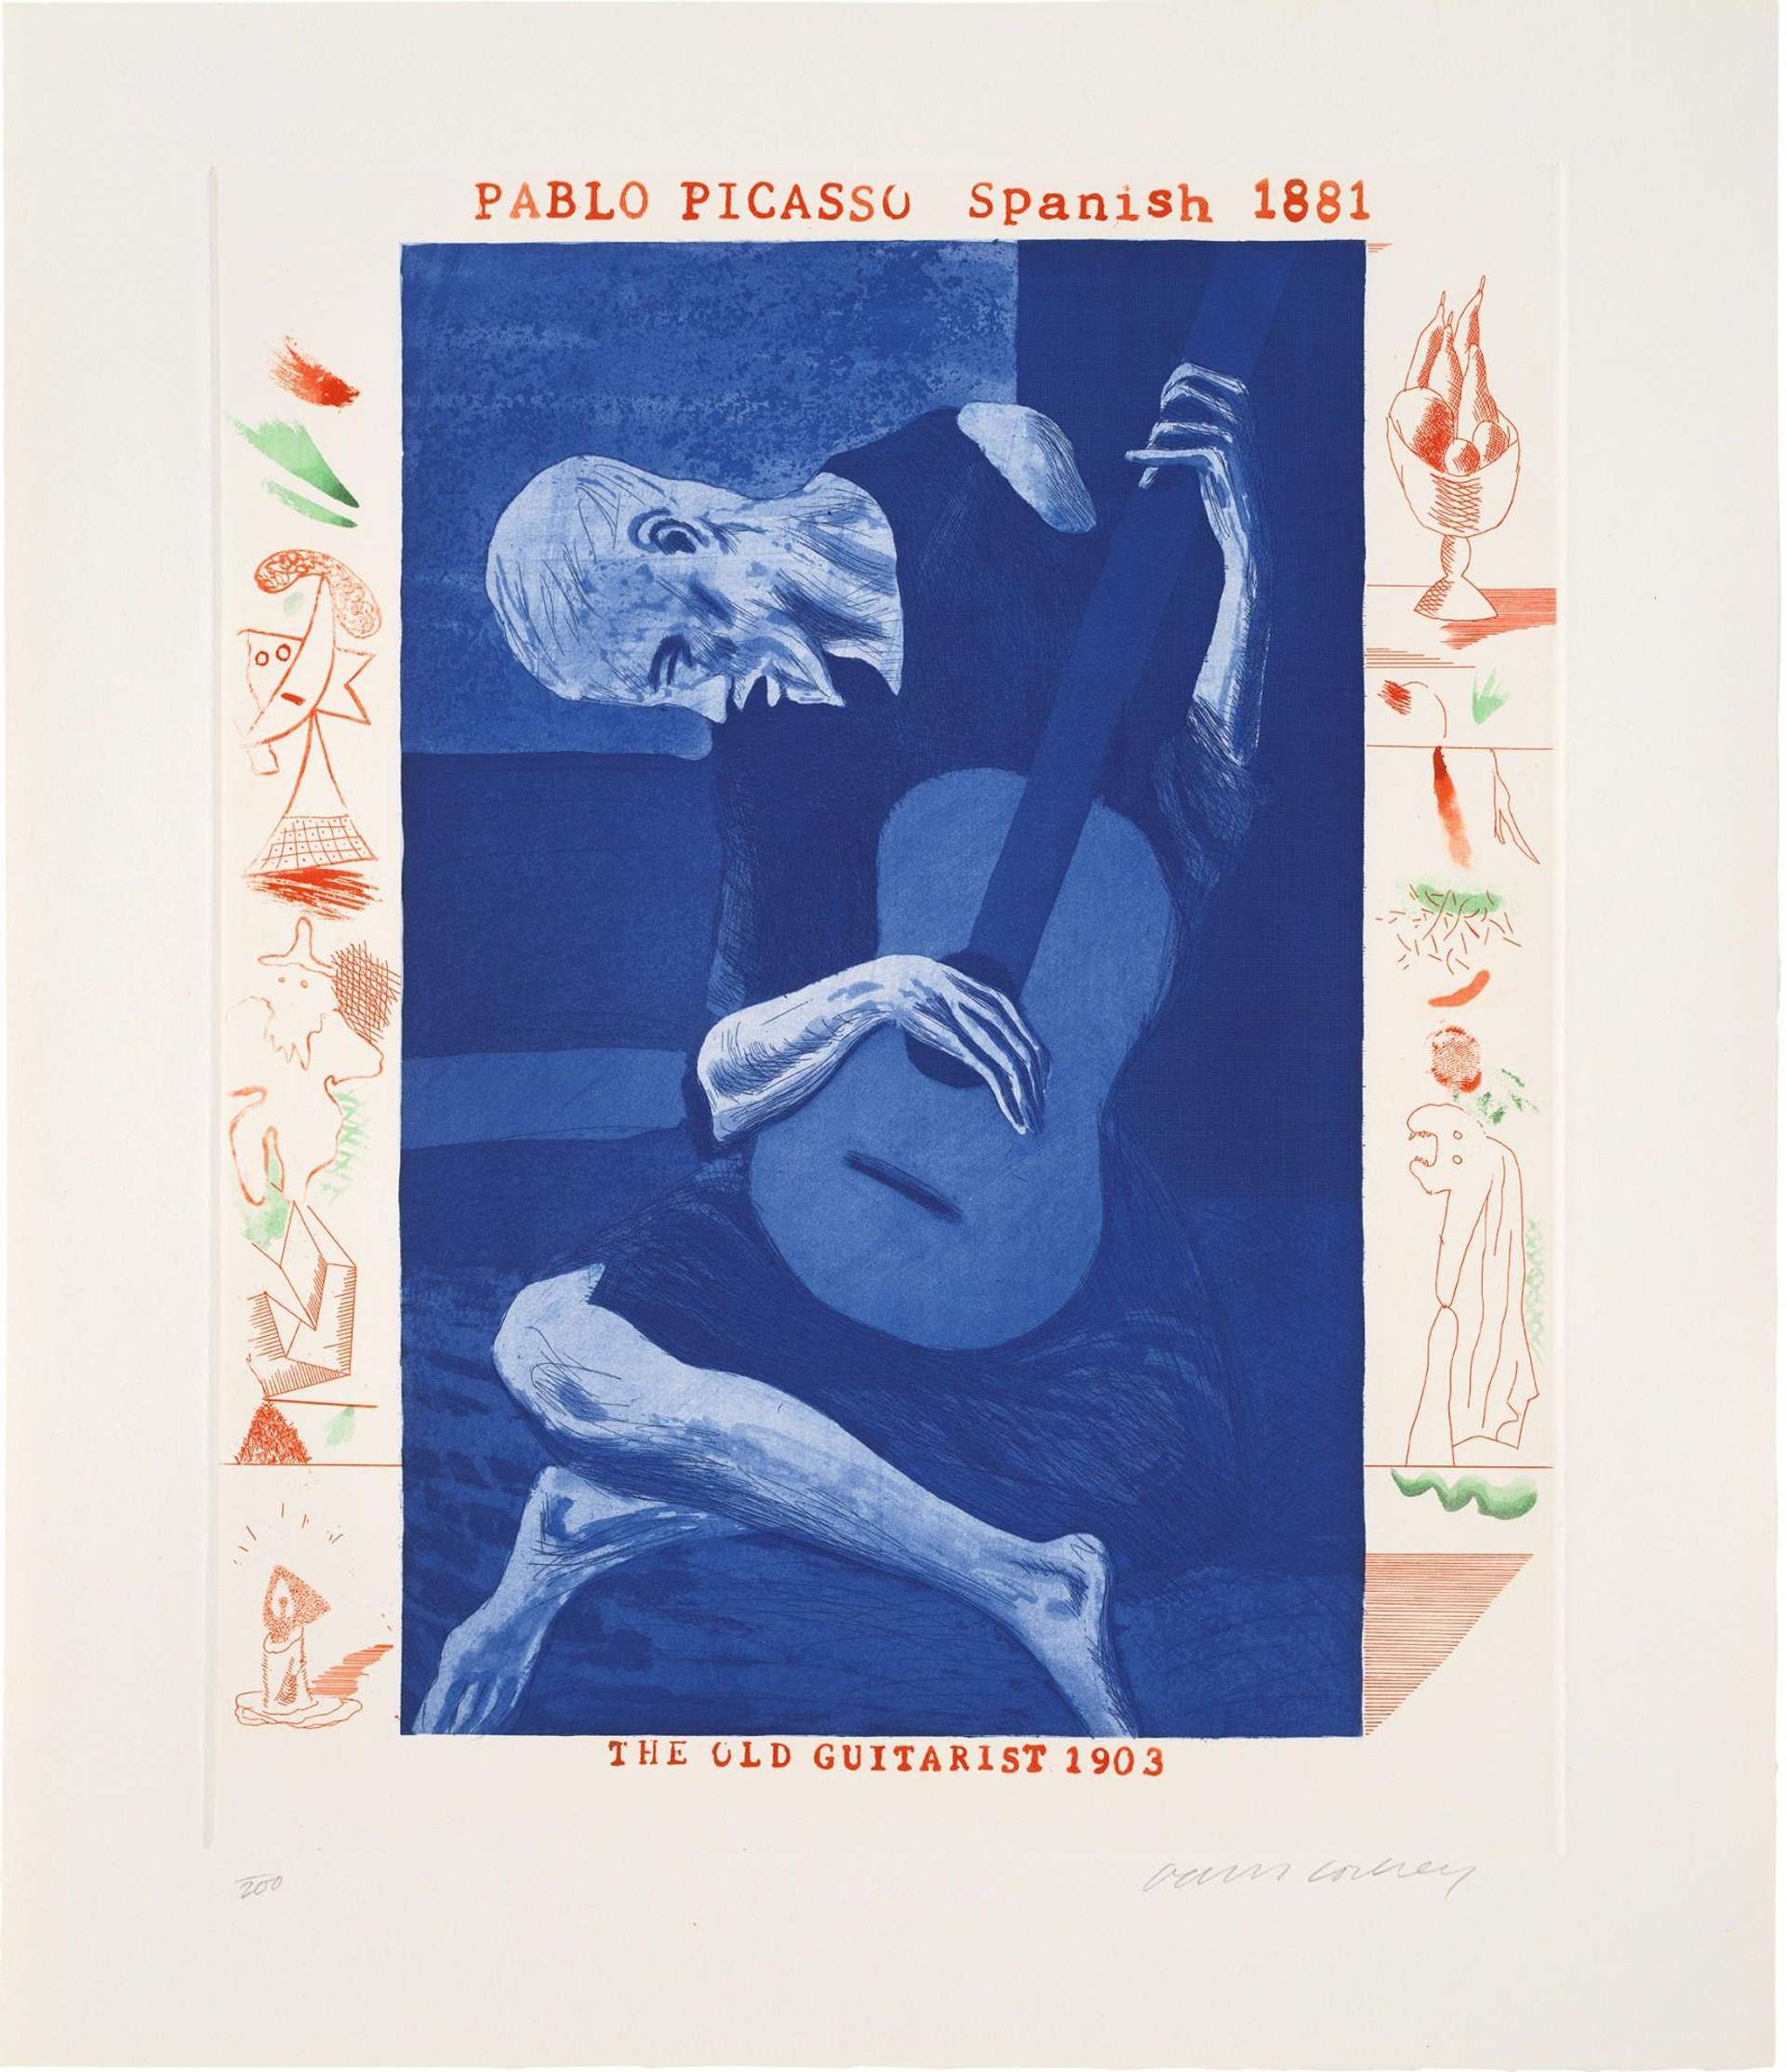 Hockney’s most overt homage to Picasso, The Old Guitarist is a direct copy of the Spanish artist’s 1903 painting, one of the most famous from his Blue Period. While the central panel is a faithful reproduction of the painting, steeped in blue ink, Hockney has chosen to frame it with a series of more lighthearted drawings of figures, still lifes and geometric shapes that recall the Cubist aesthetic of Picasso’s later periods, updated for the ’70s. 